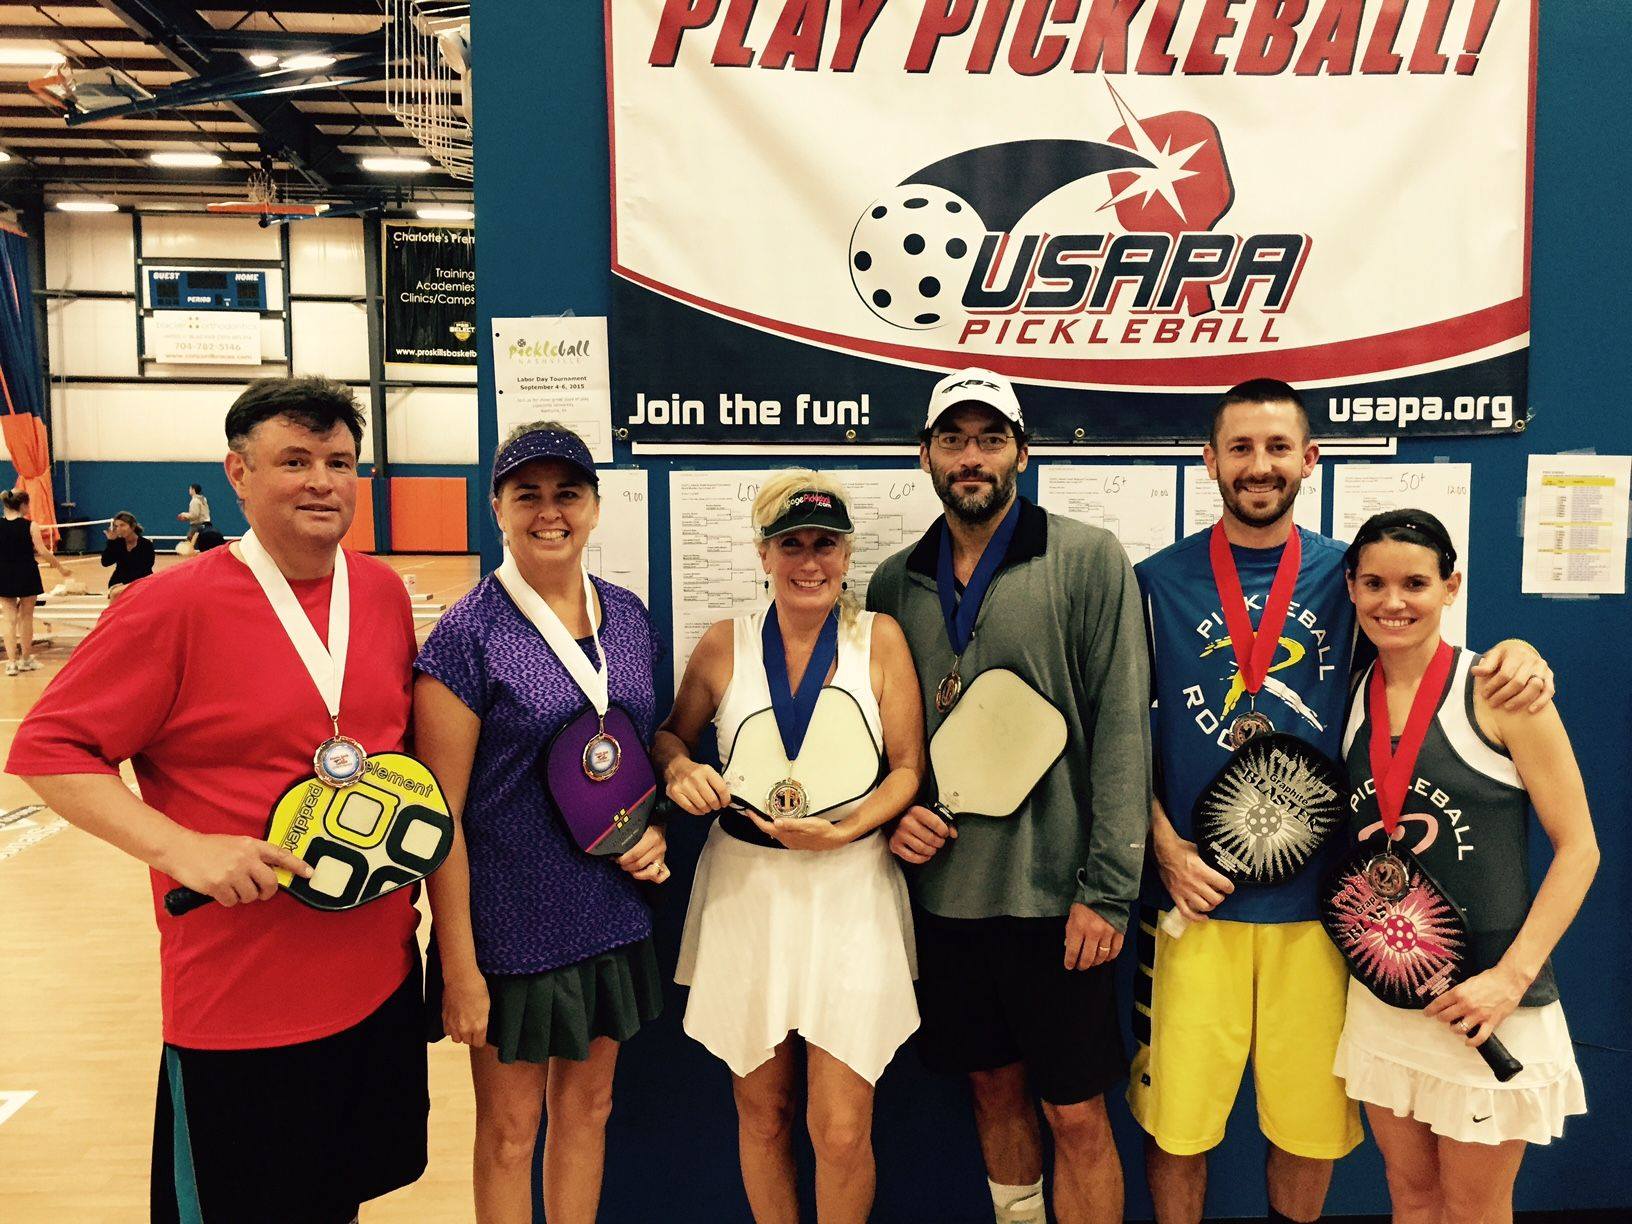 USAPA 2015 Nationals: Gold Medalists Rob and Jodi Elliott, Silver Medalists Josh and Abby Grubbs and Bronze Medalists Scott Clayson and Stephanie Lane.